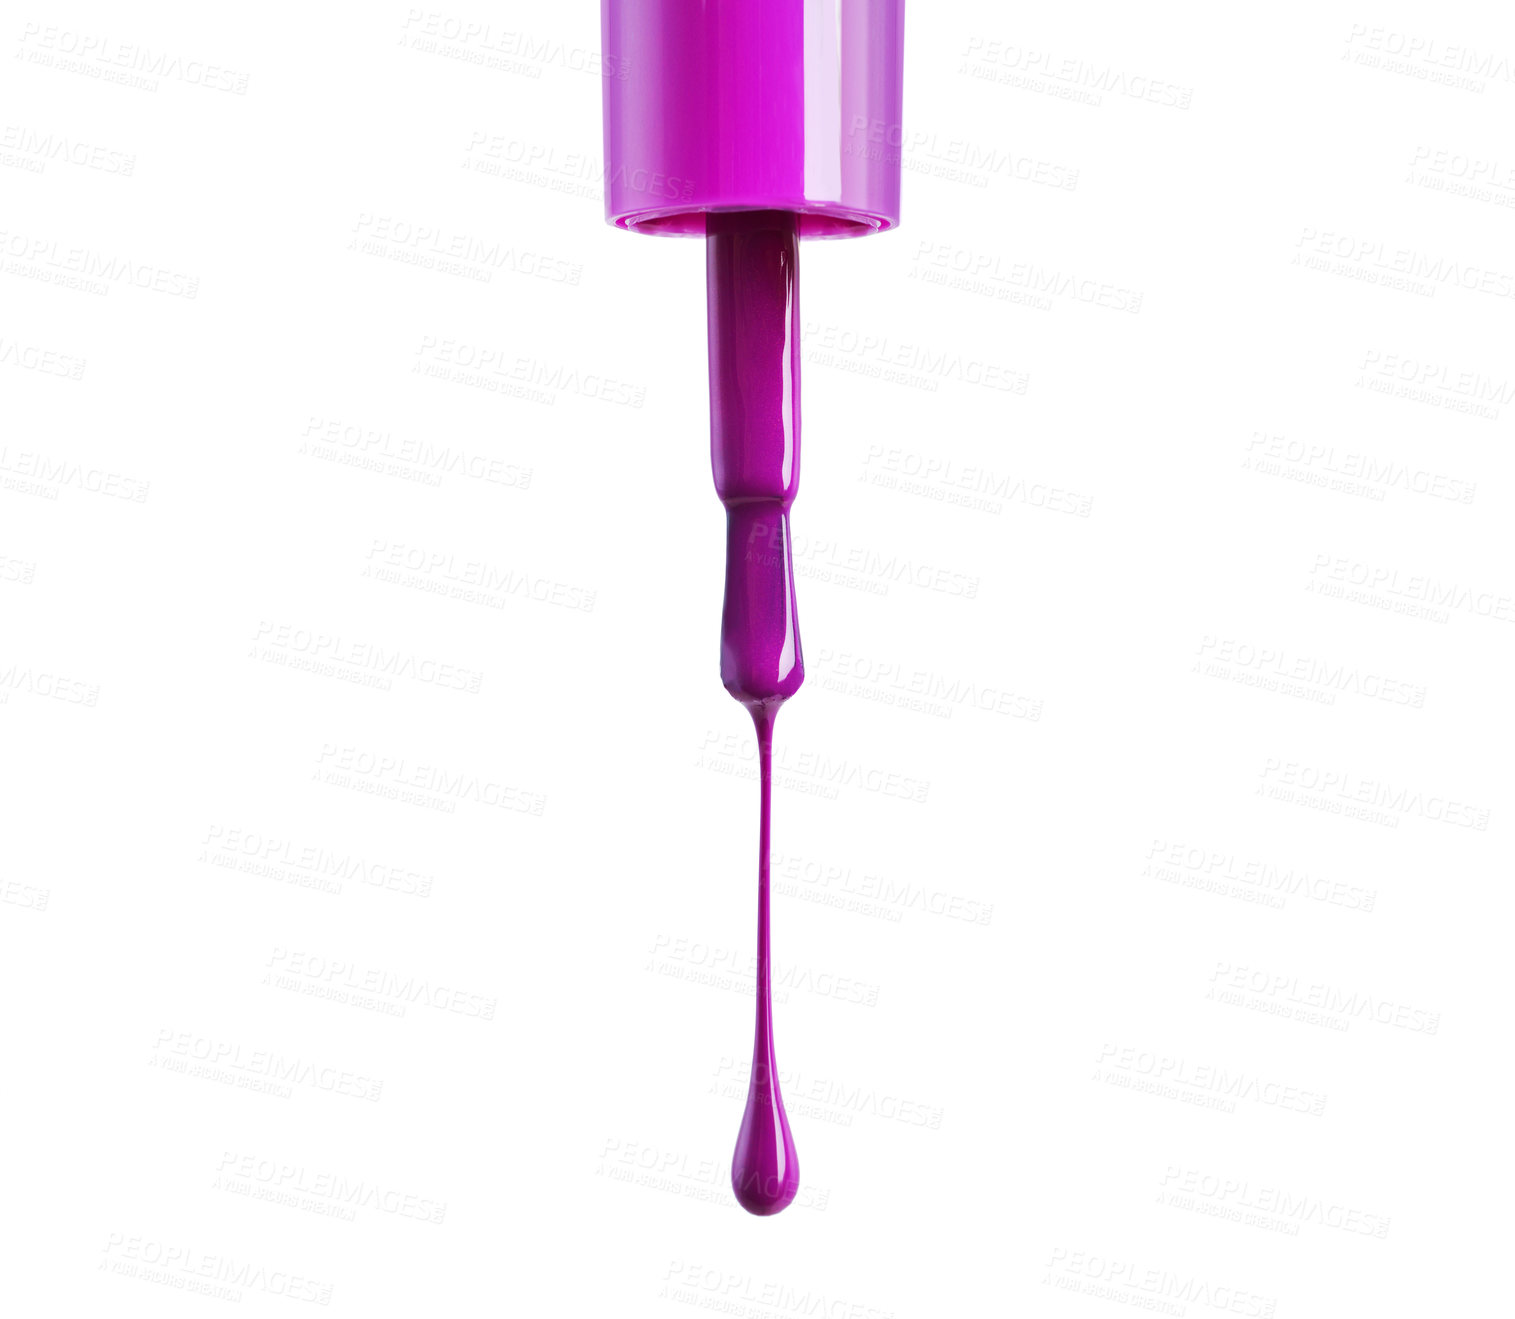 Buy stock photo A nail polish brush dripping against a white background